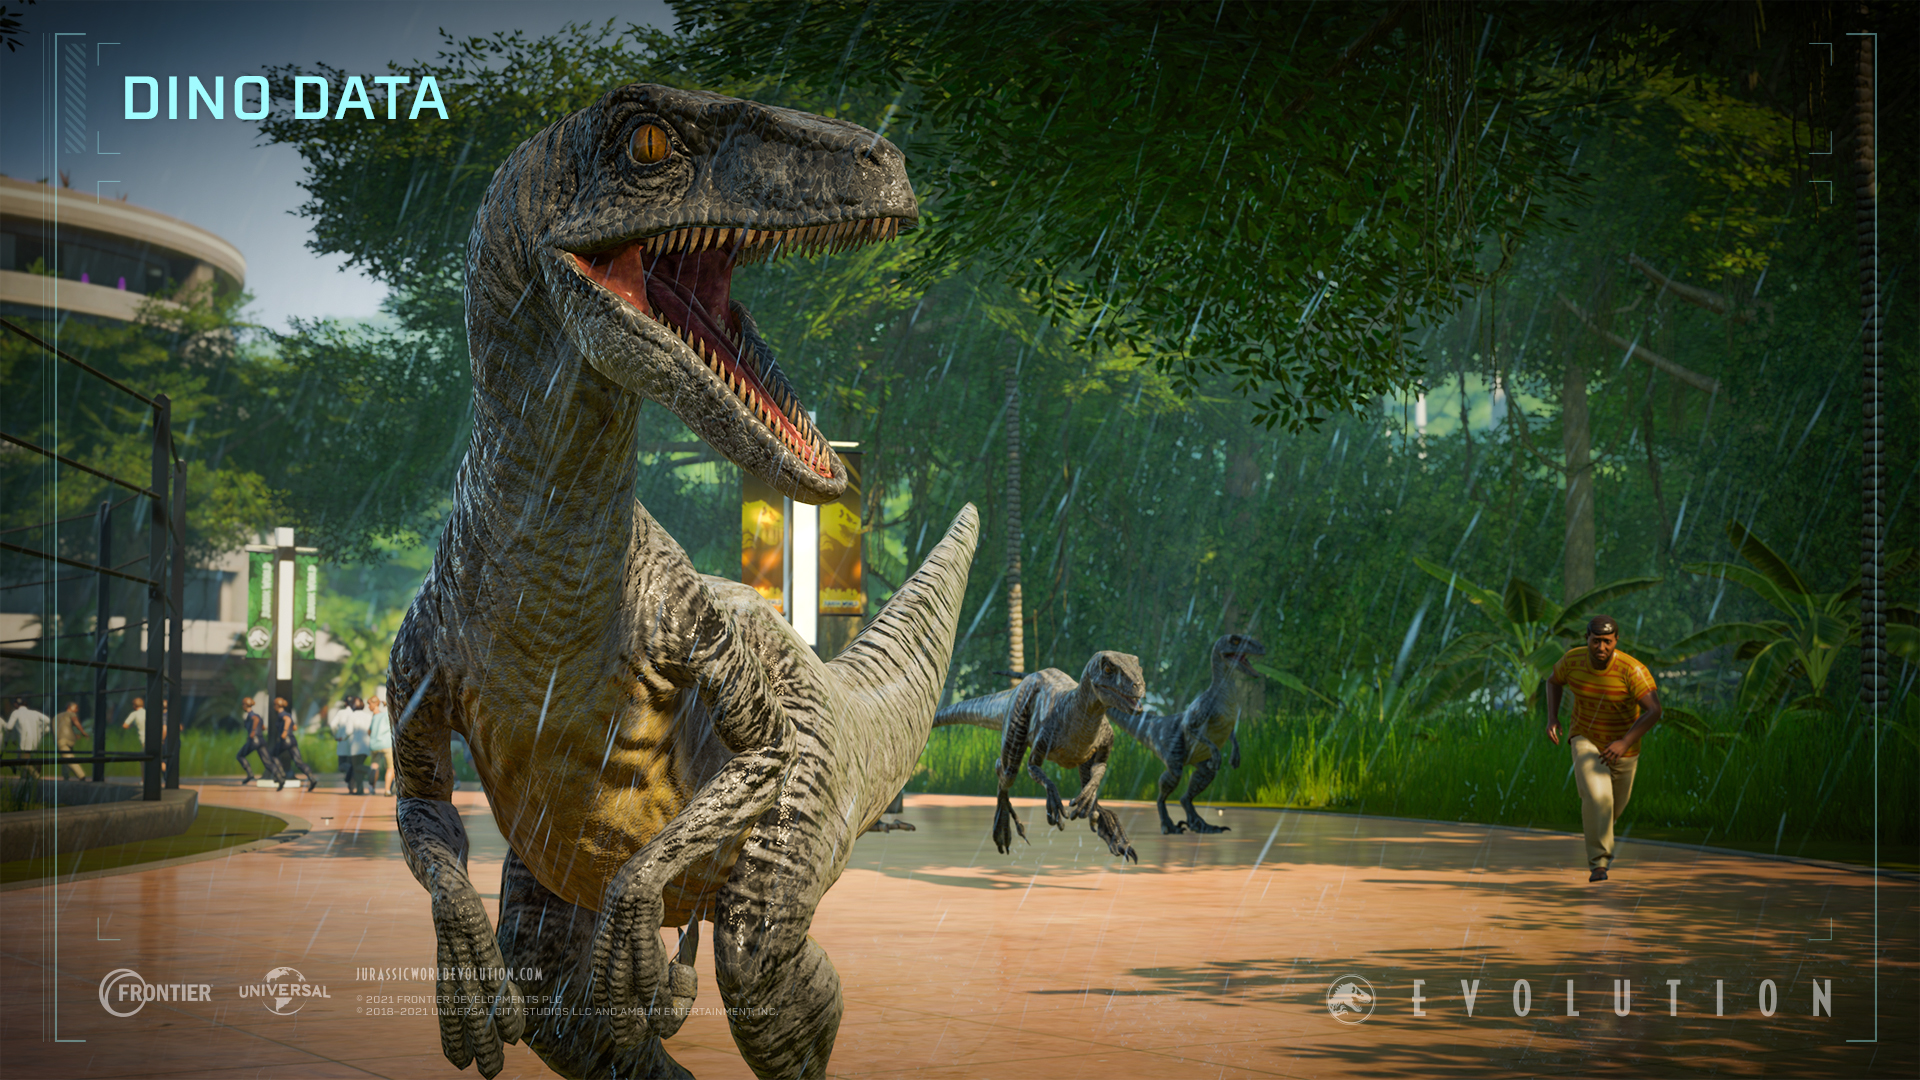 Jurassic World Evolution 2's time for some #DinoData: Sometimes dinosaurs break out and will hunt a guest or two, but can you guess who's eaten the most guests in